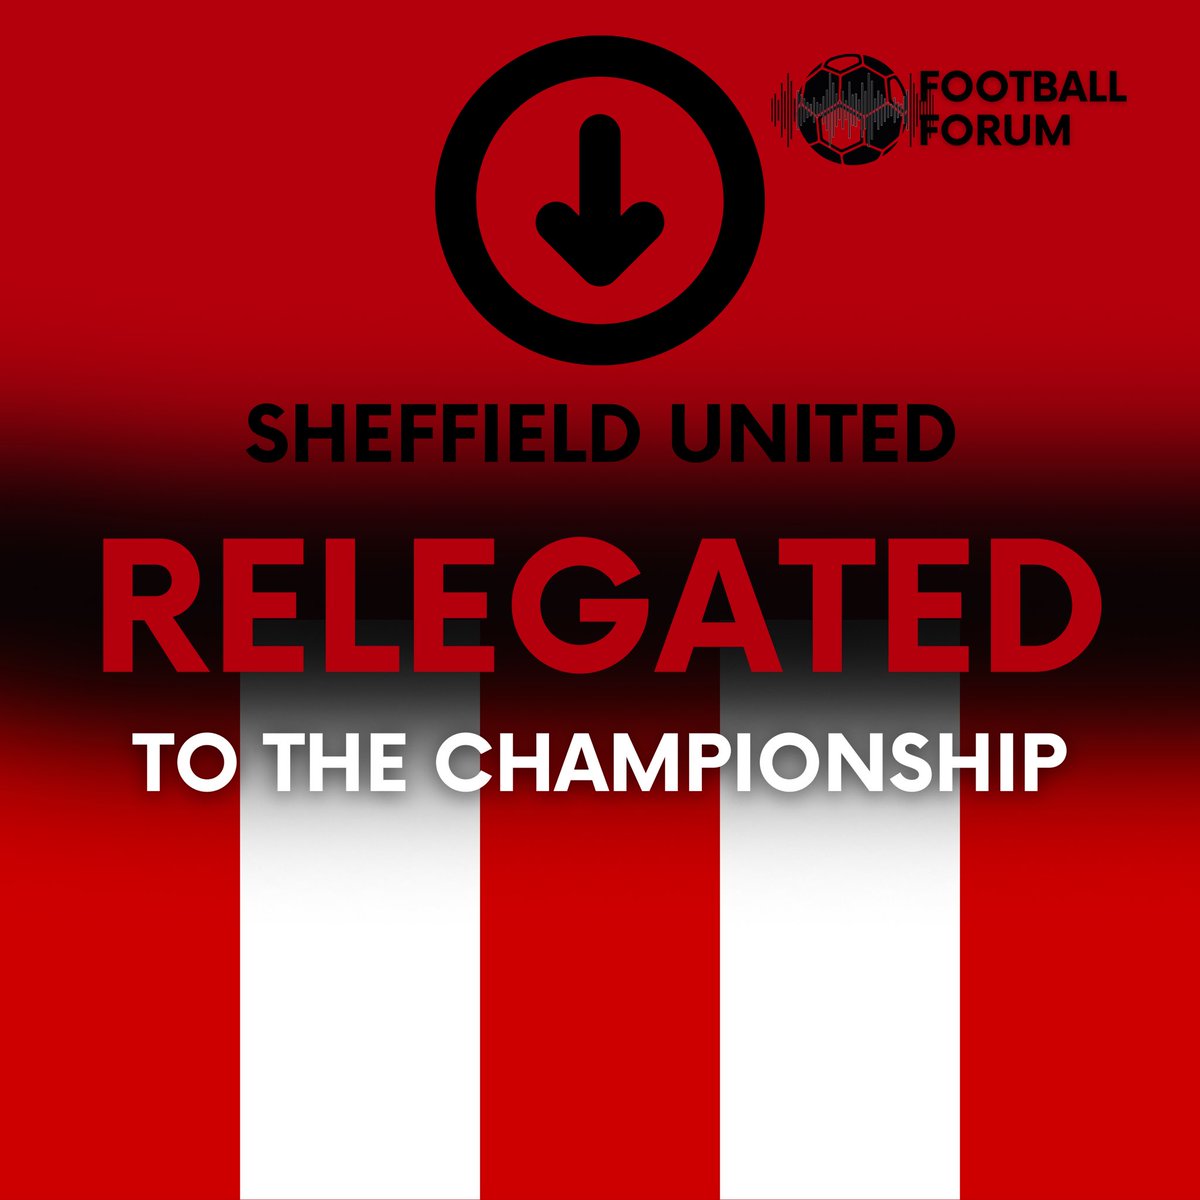 FULL TIME ⛔️

⚫️⚪️ Newcastle United 5️⃣
🟡🟡 Sheffield United 1️⃣

⚔️ Full time on the Blades’ stay in the Premier League, as they are relegated to the Championship after one season in the top flight.

#SUFC | #FootballForum